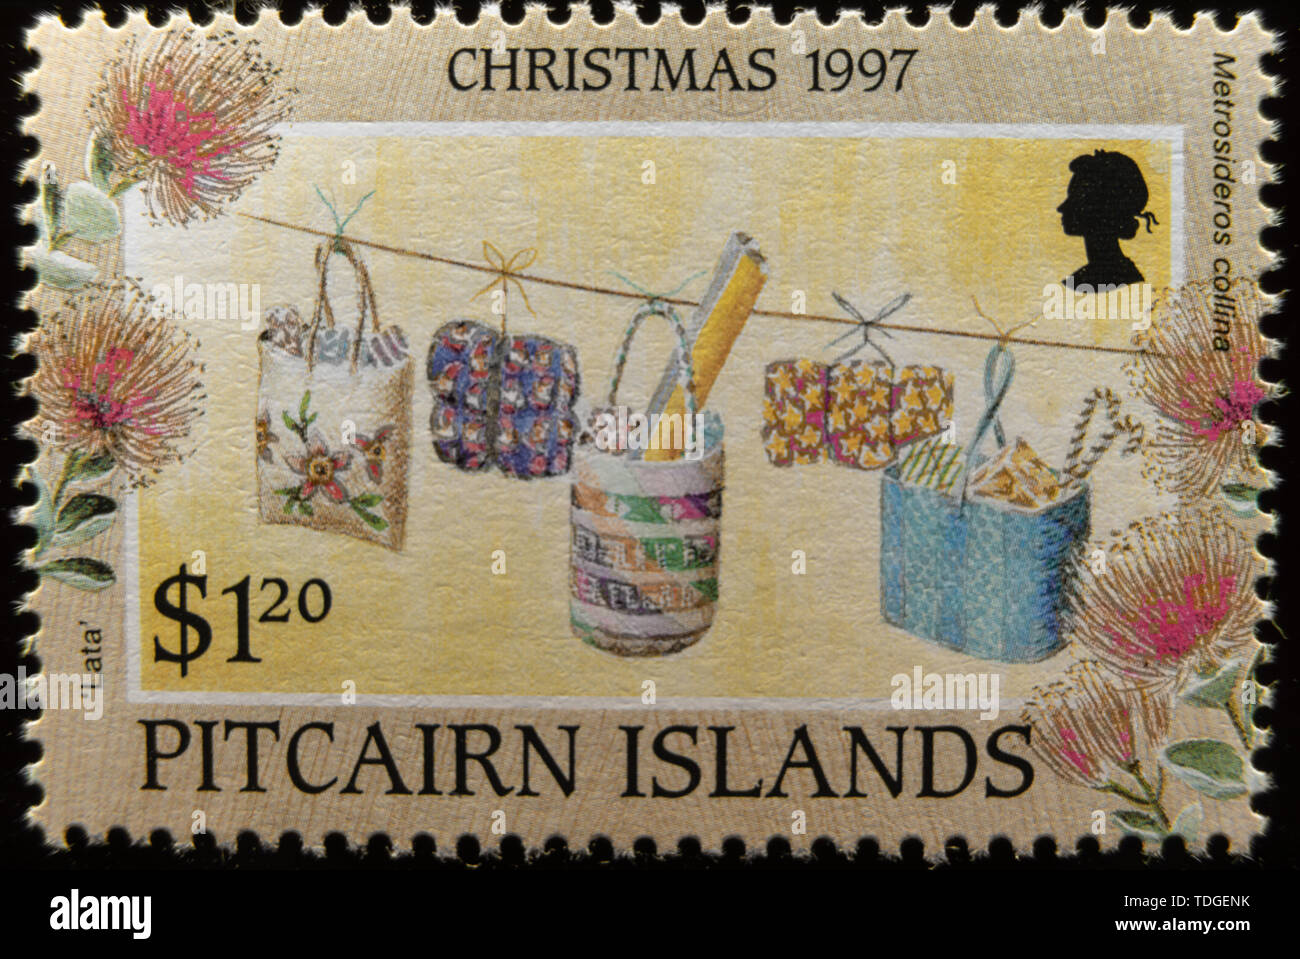 A macro image of a commemorative Pitcairn Islands $1.20 Christmas 1997 postage stamp. Stock Photo